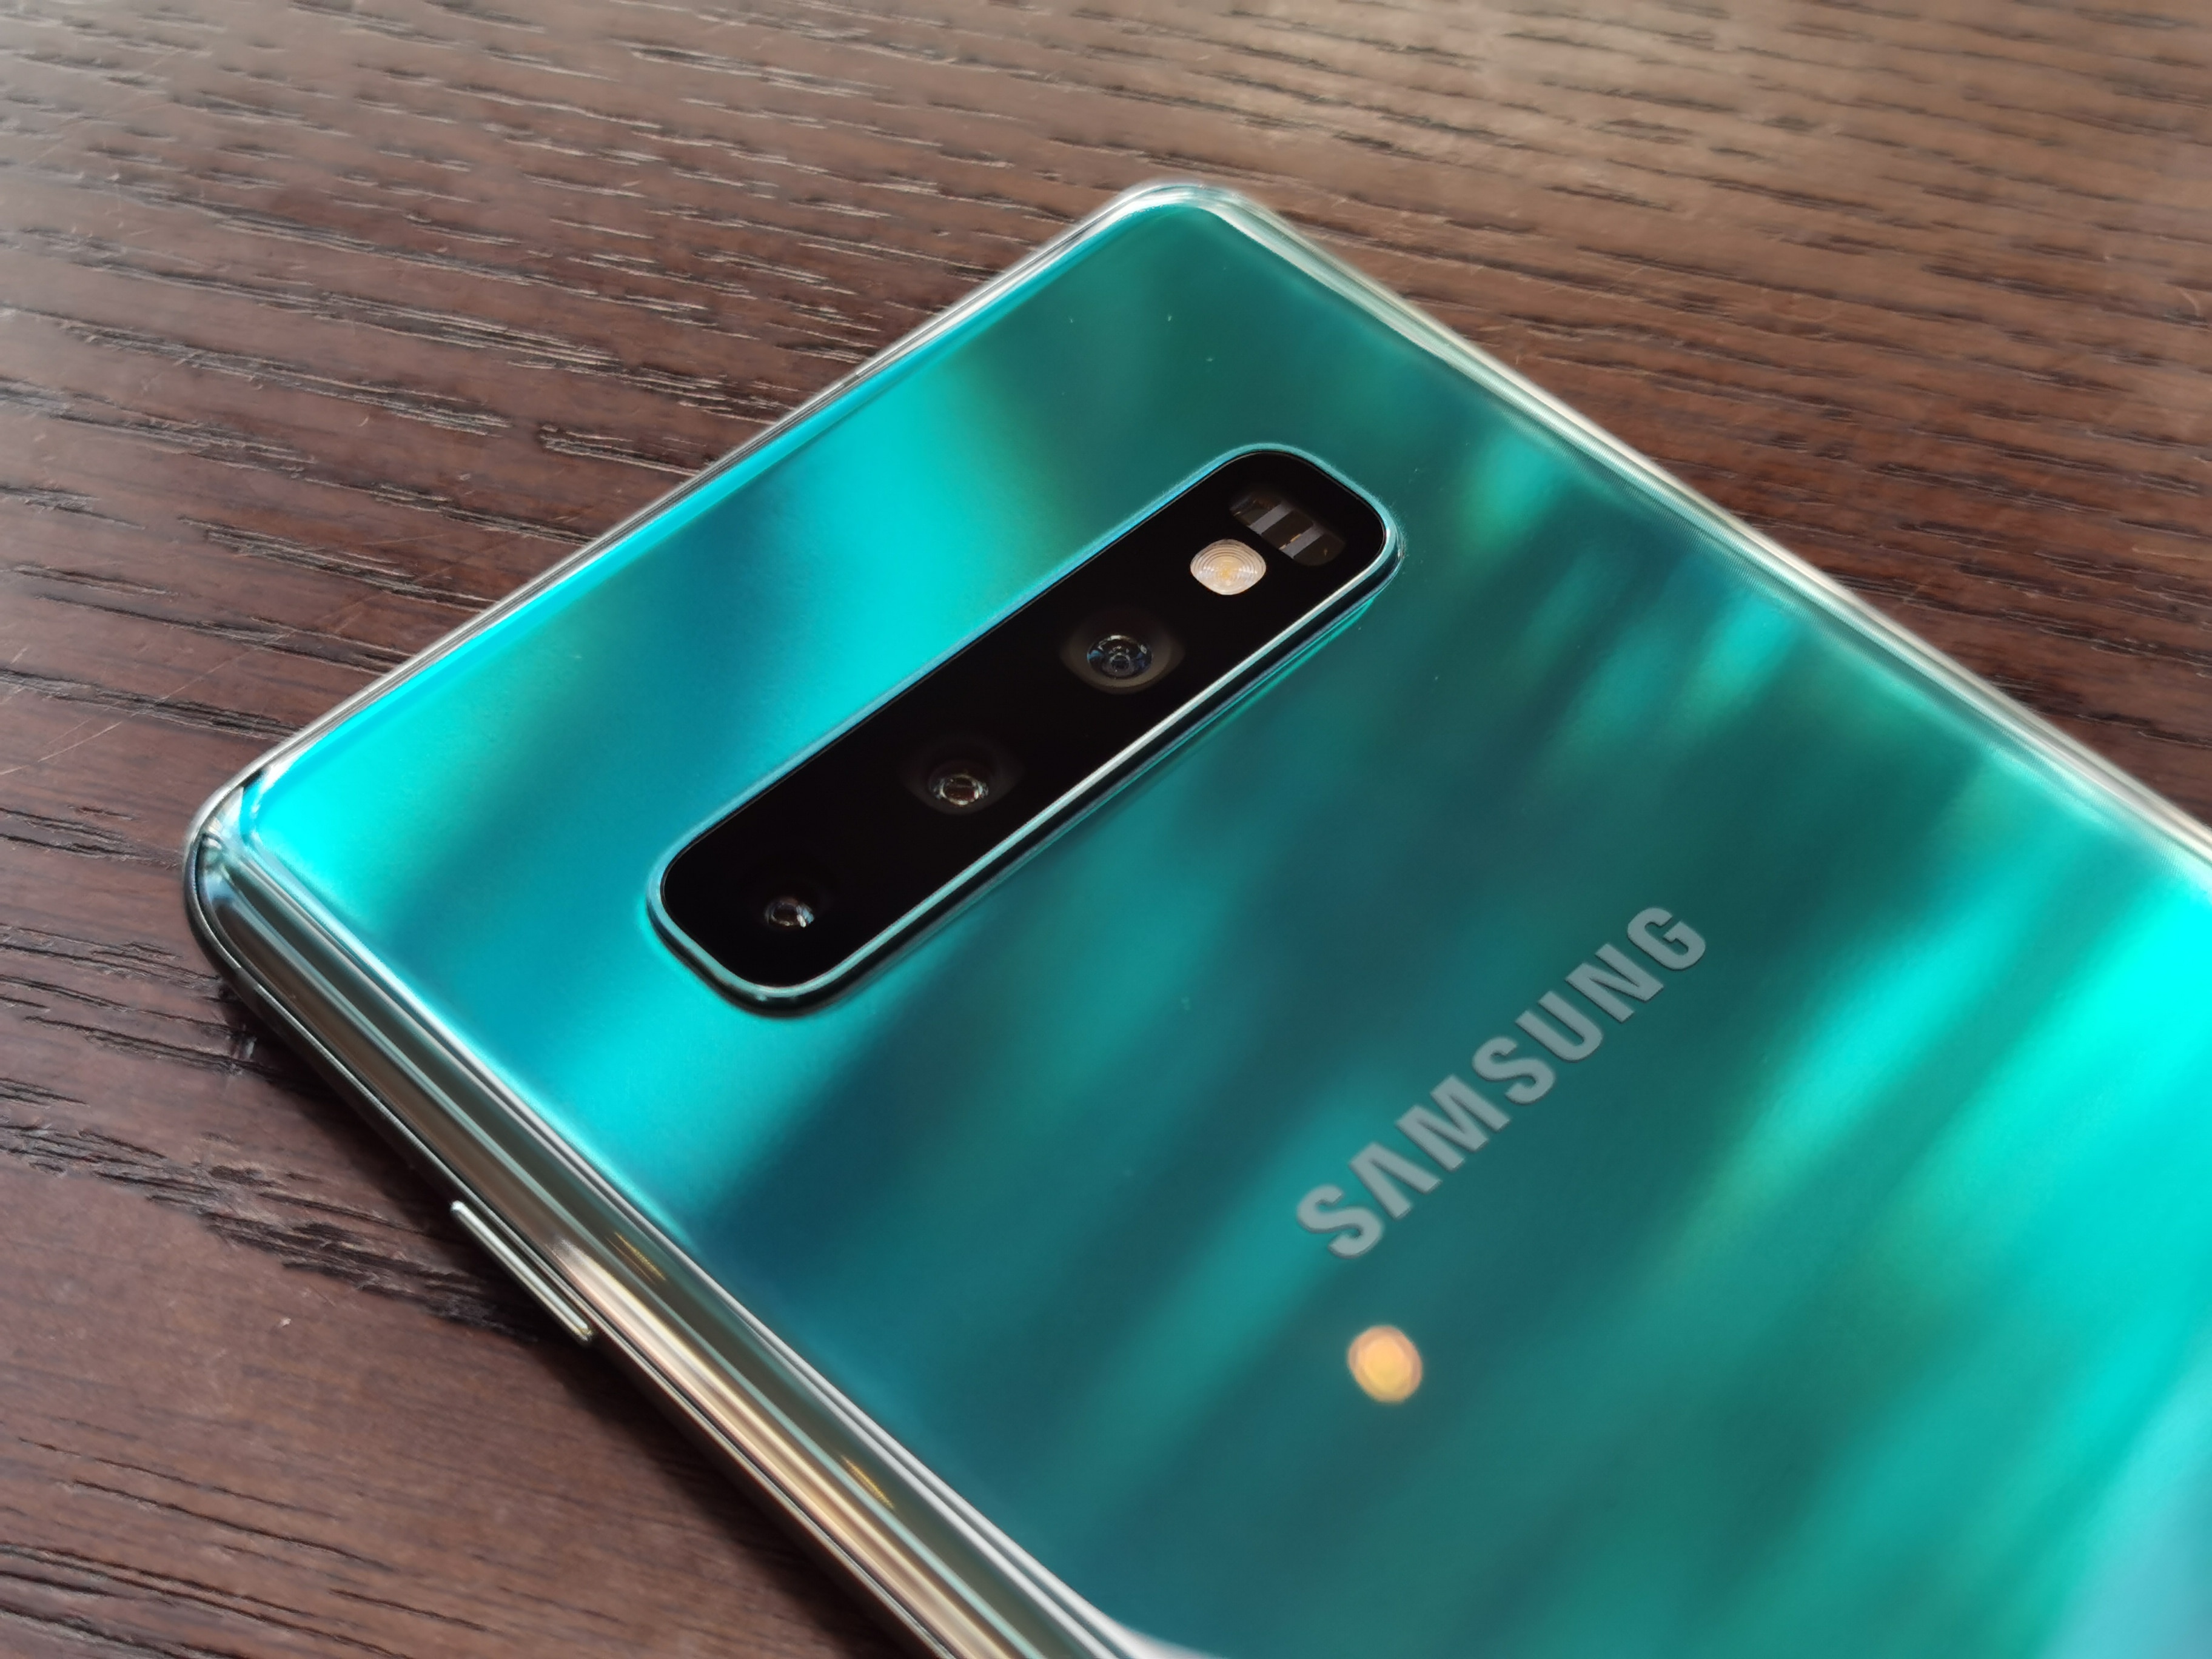 Samsung S S10 Is Sexiest Best Galaxy Yet Review Abs Cbn News